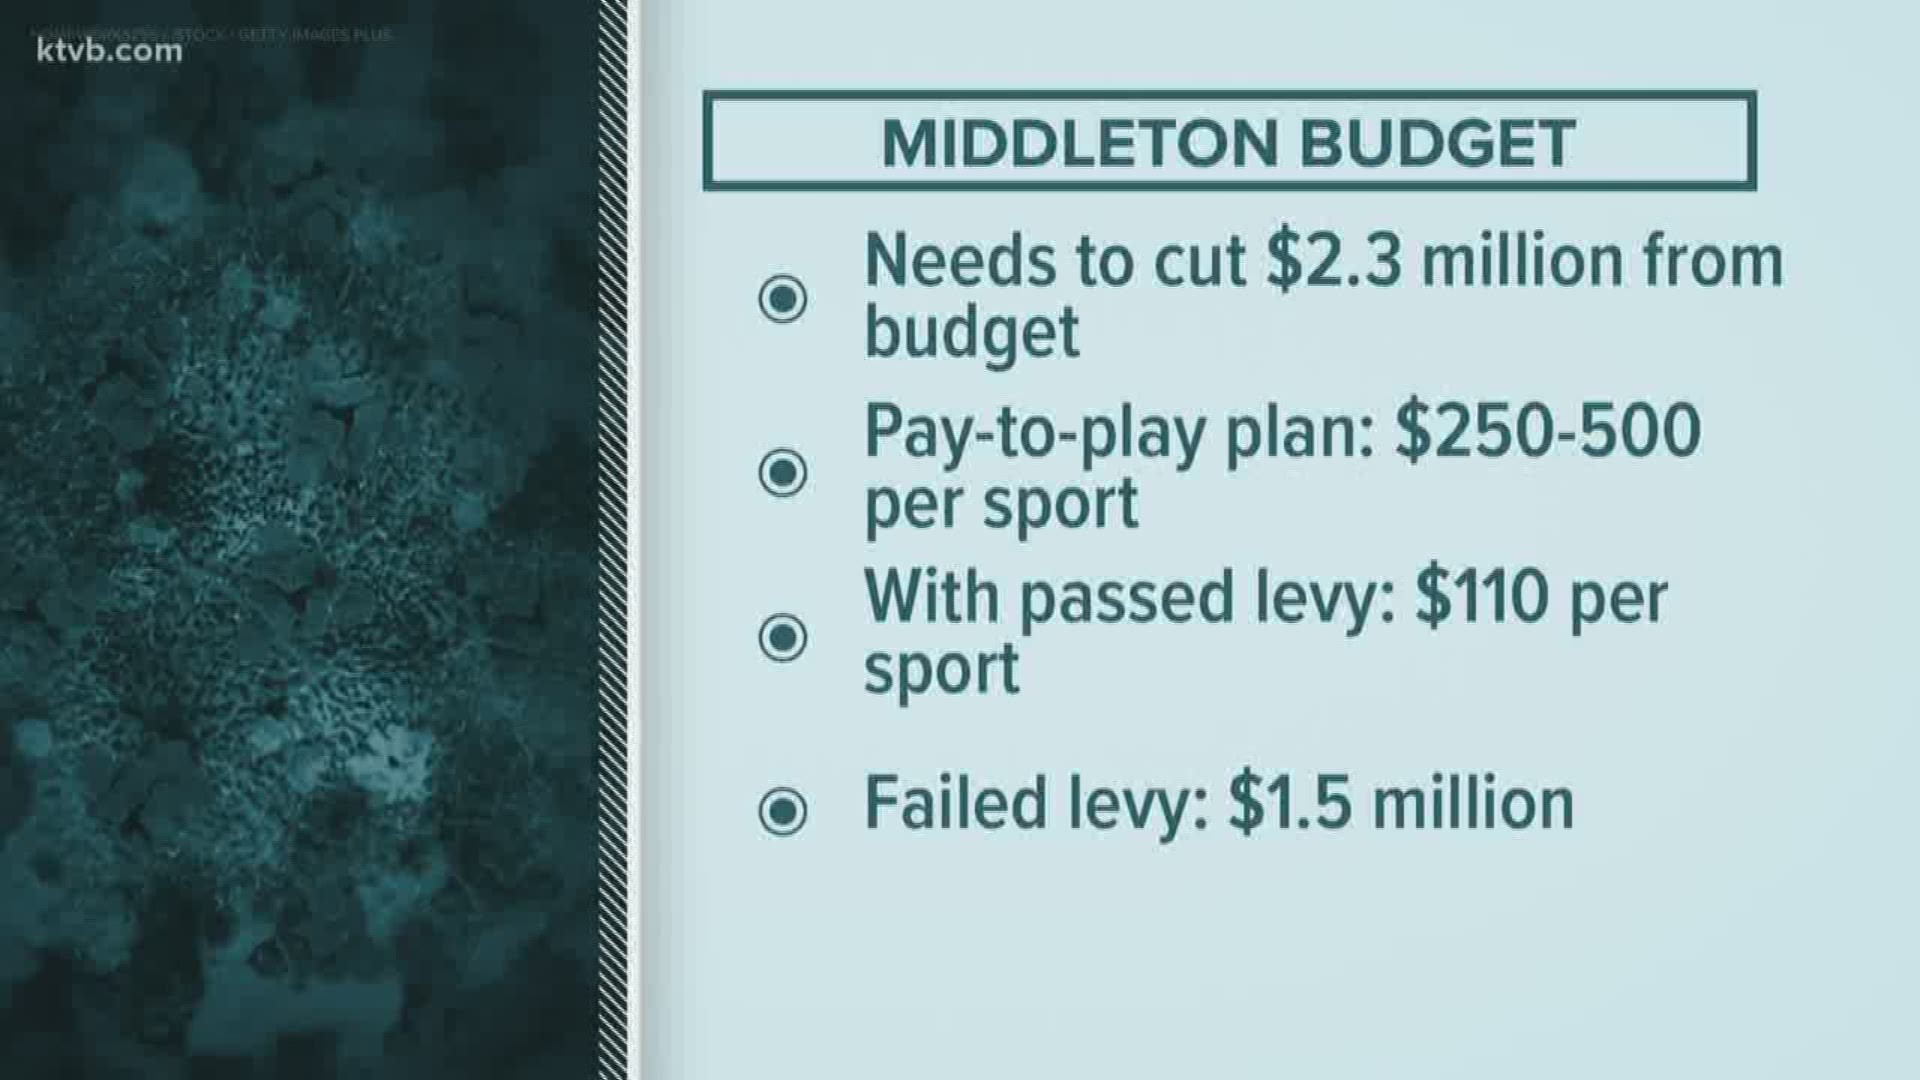 The Athletics department at Middleton School District is responsible for preventing a $2.3 million budget cut.